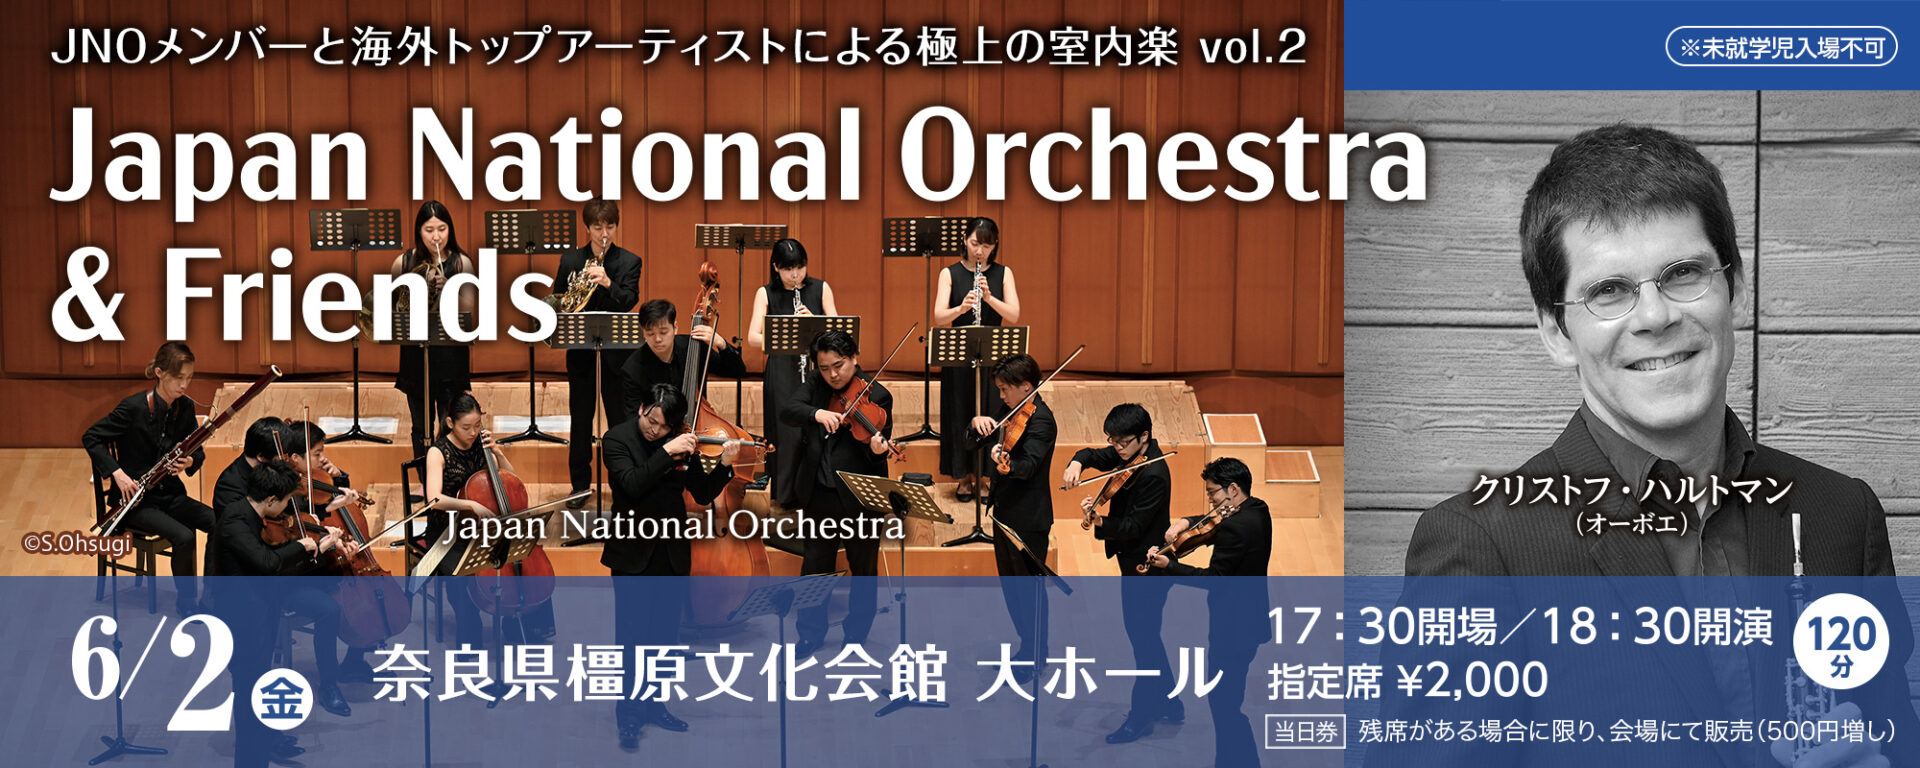 Japan National Orchestra & Friends